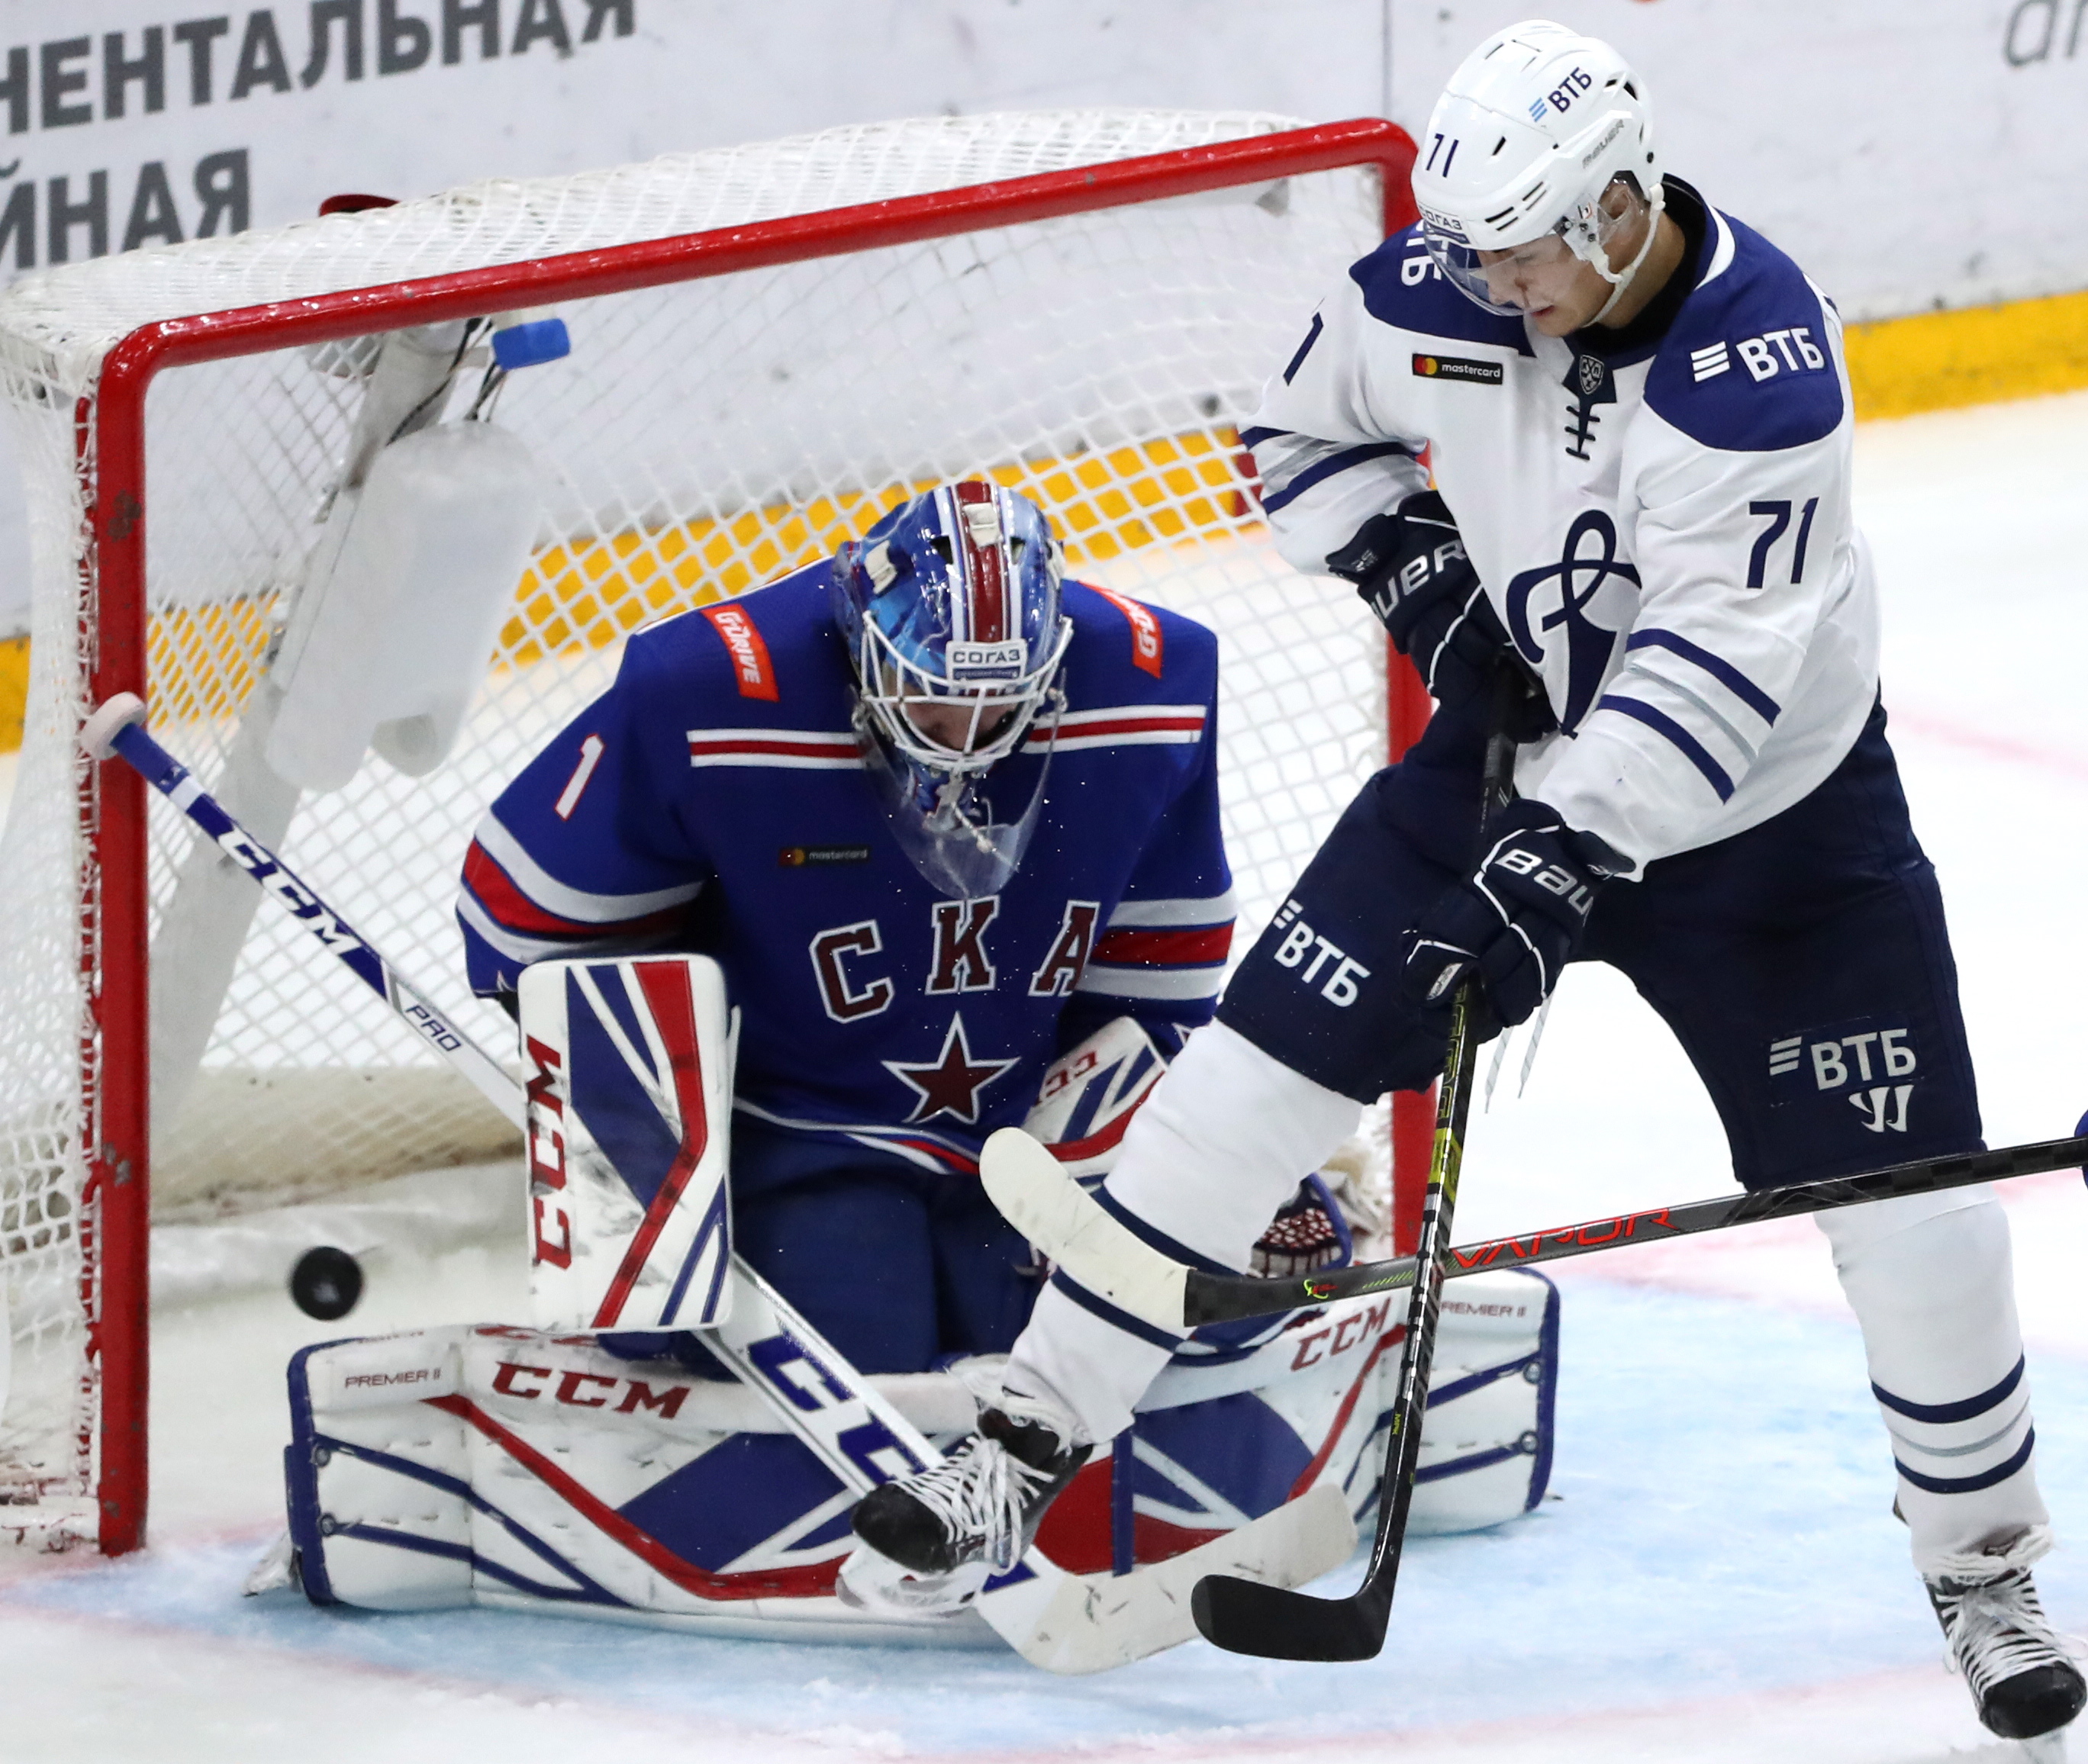 ST PETERSBURG, RUSSIA - SEPTEMBER 28, 2019: SKA St Petersburg's goaltender Alexei Melnichuk (L) and Dynamo Moscow's Ivan Muranov in a 2019/2020 KHL Regular Season ice hockey match between SKA St Petersburg and Dynamo Moscow at Ledovy Dvorets Arena (Ice Palace).